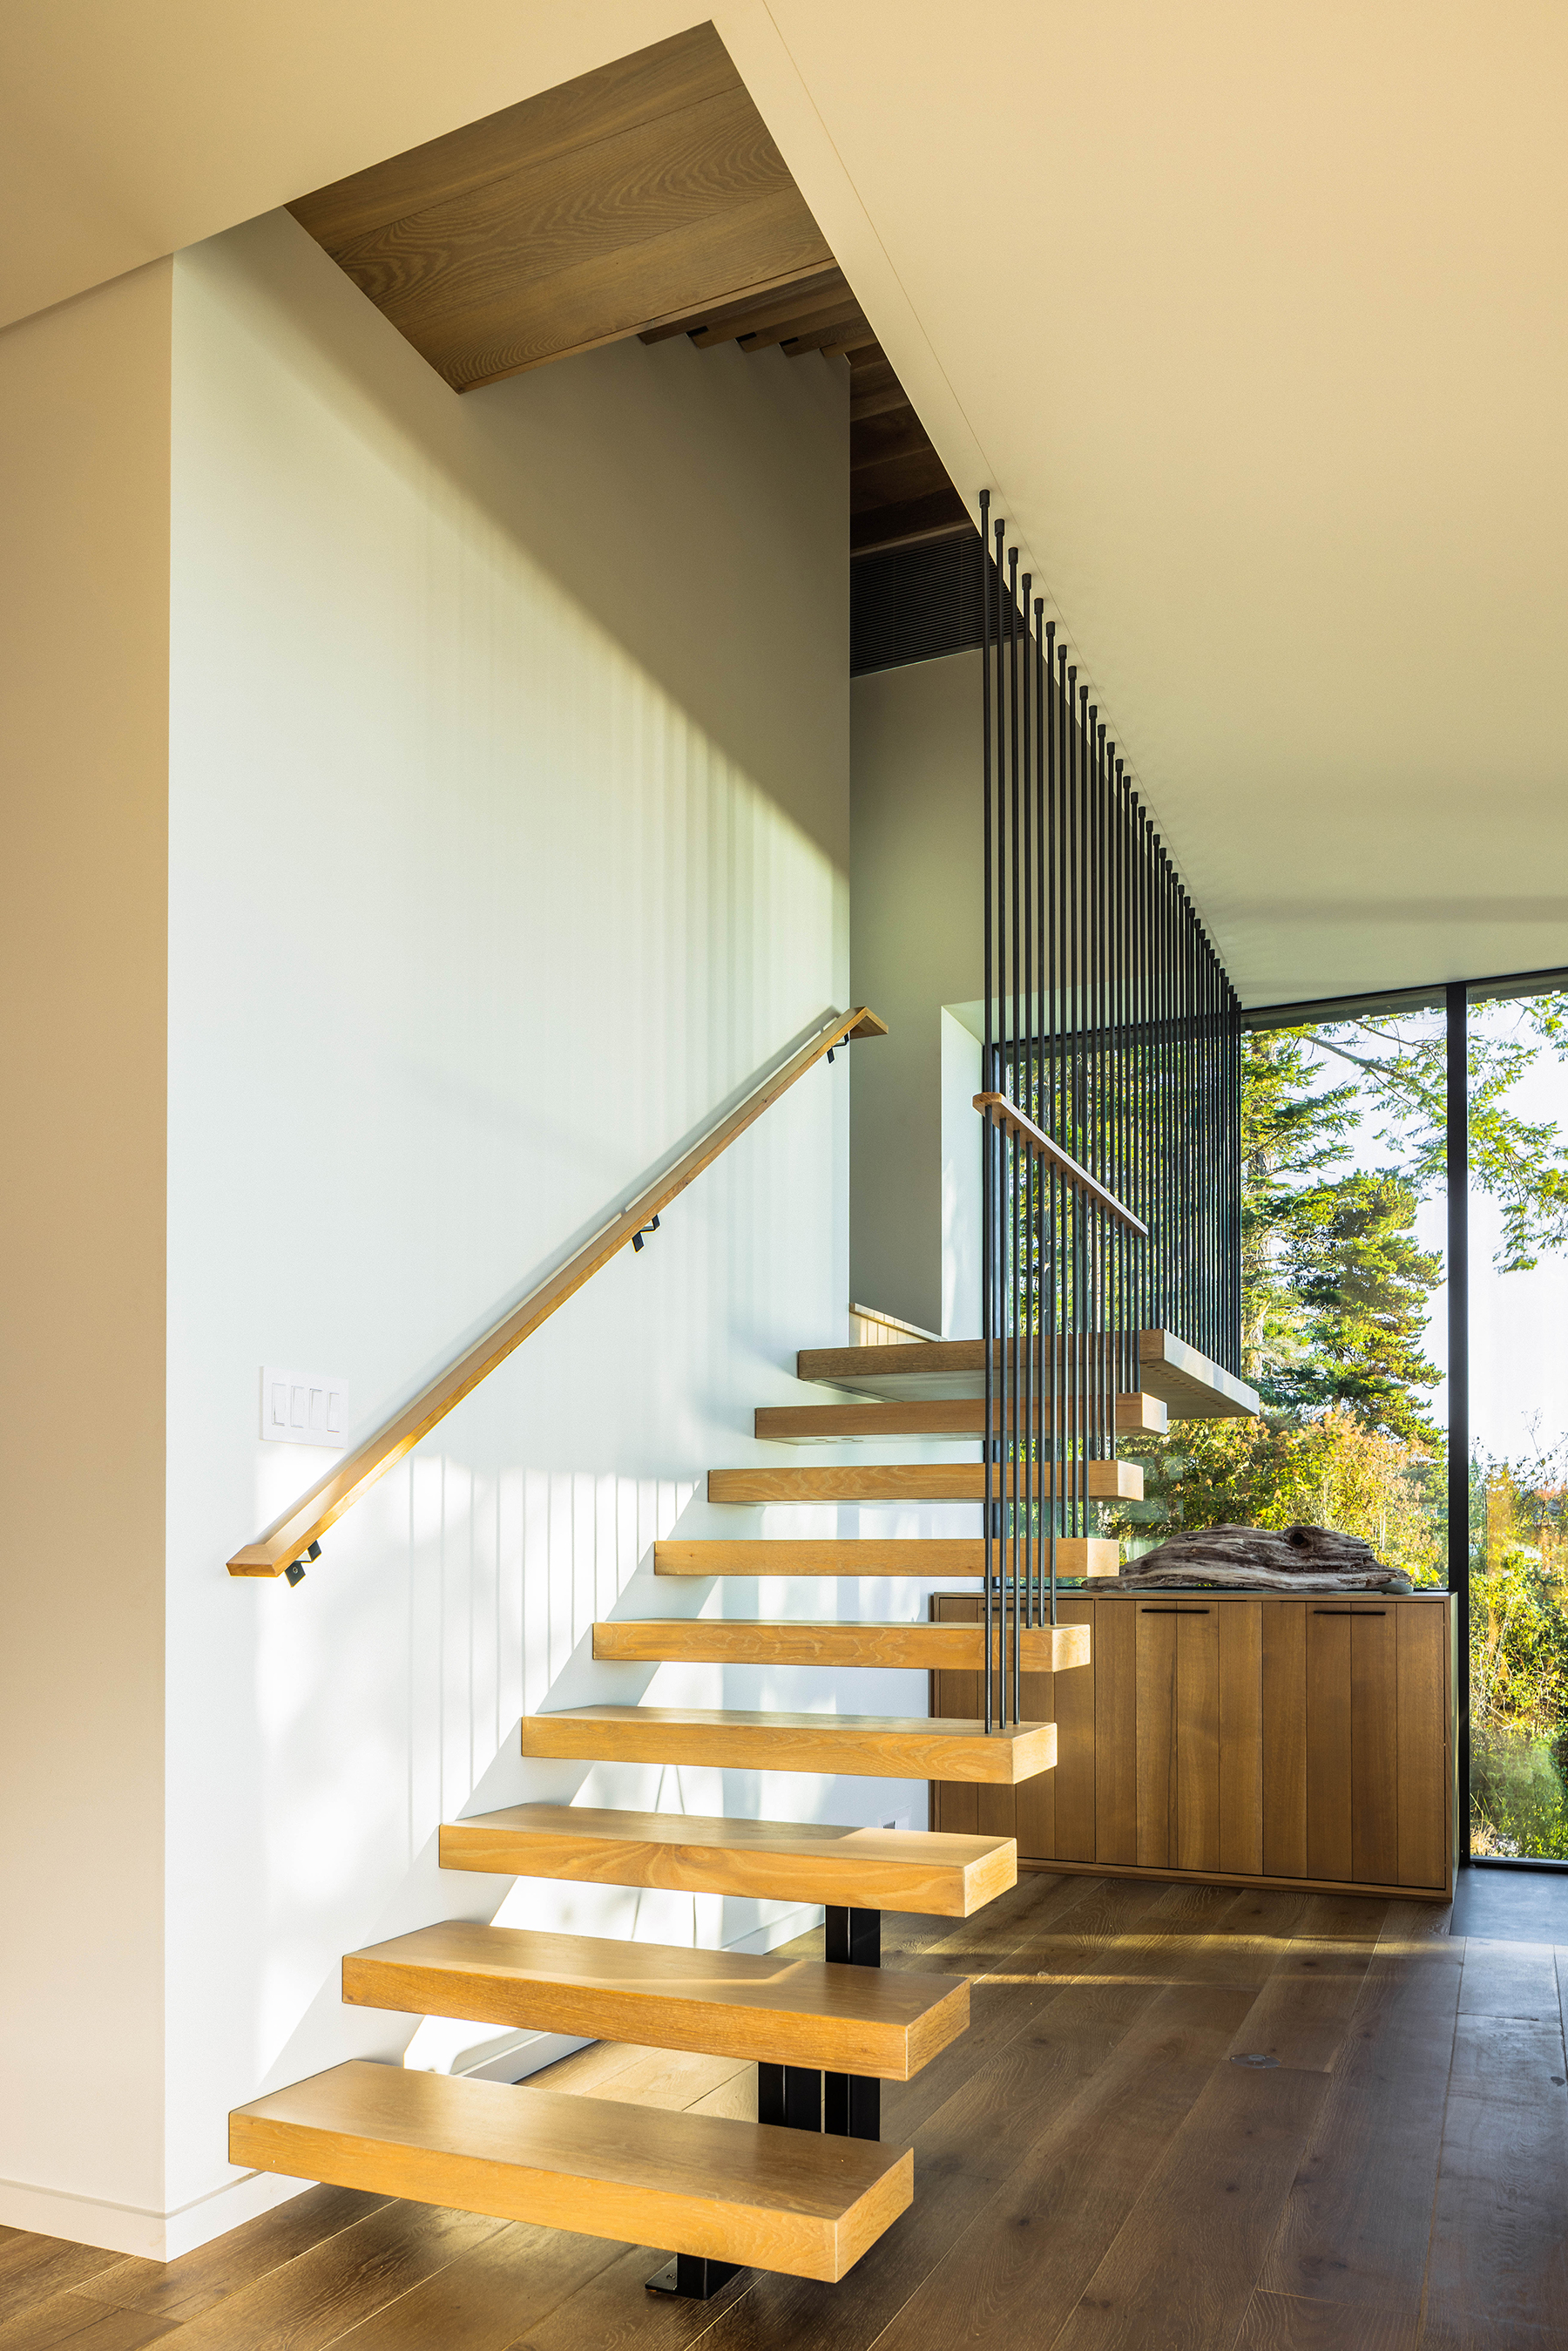 Stairs in Lopez Island House